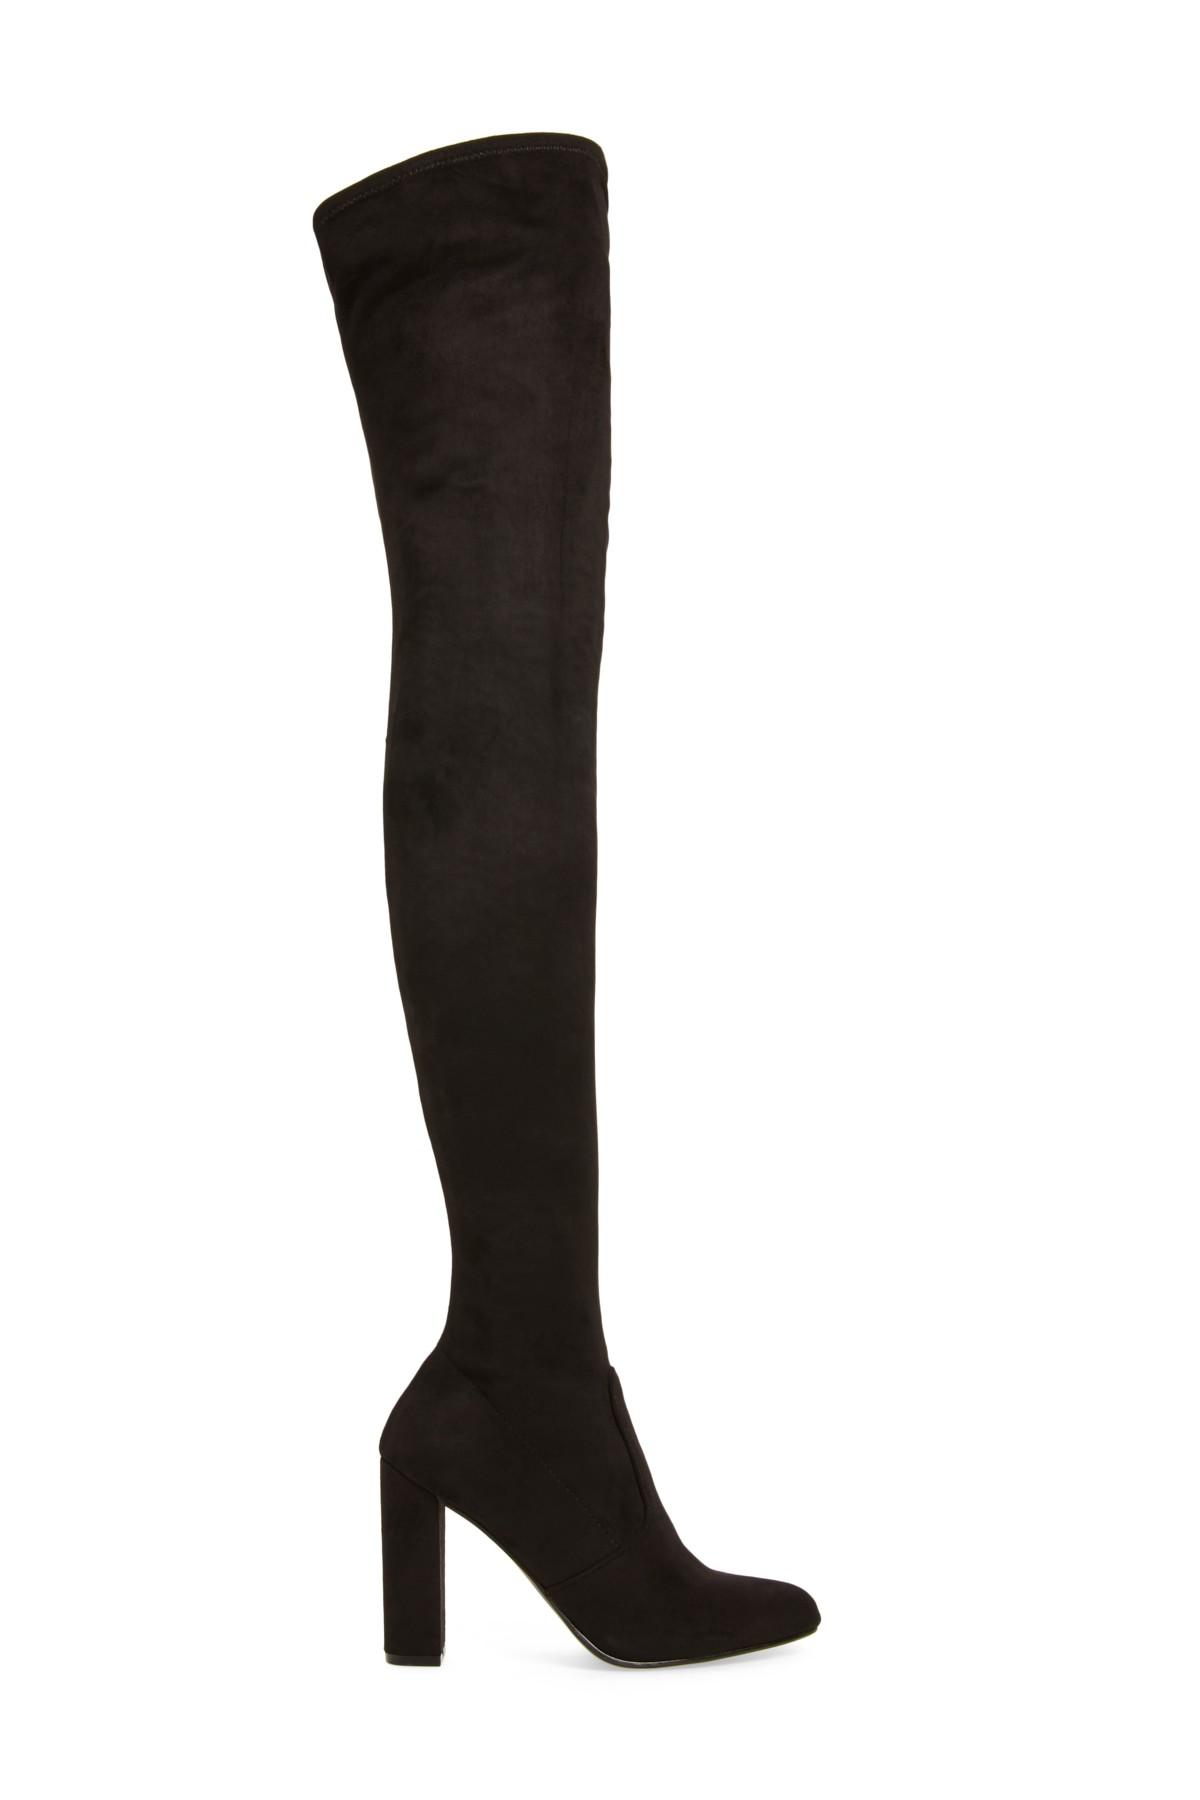 thigh high boots steve madden,OFF 59%,www.concordehotels.com.tr